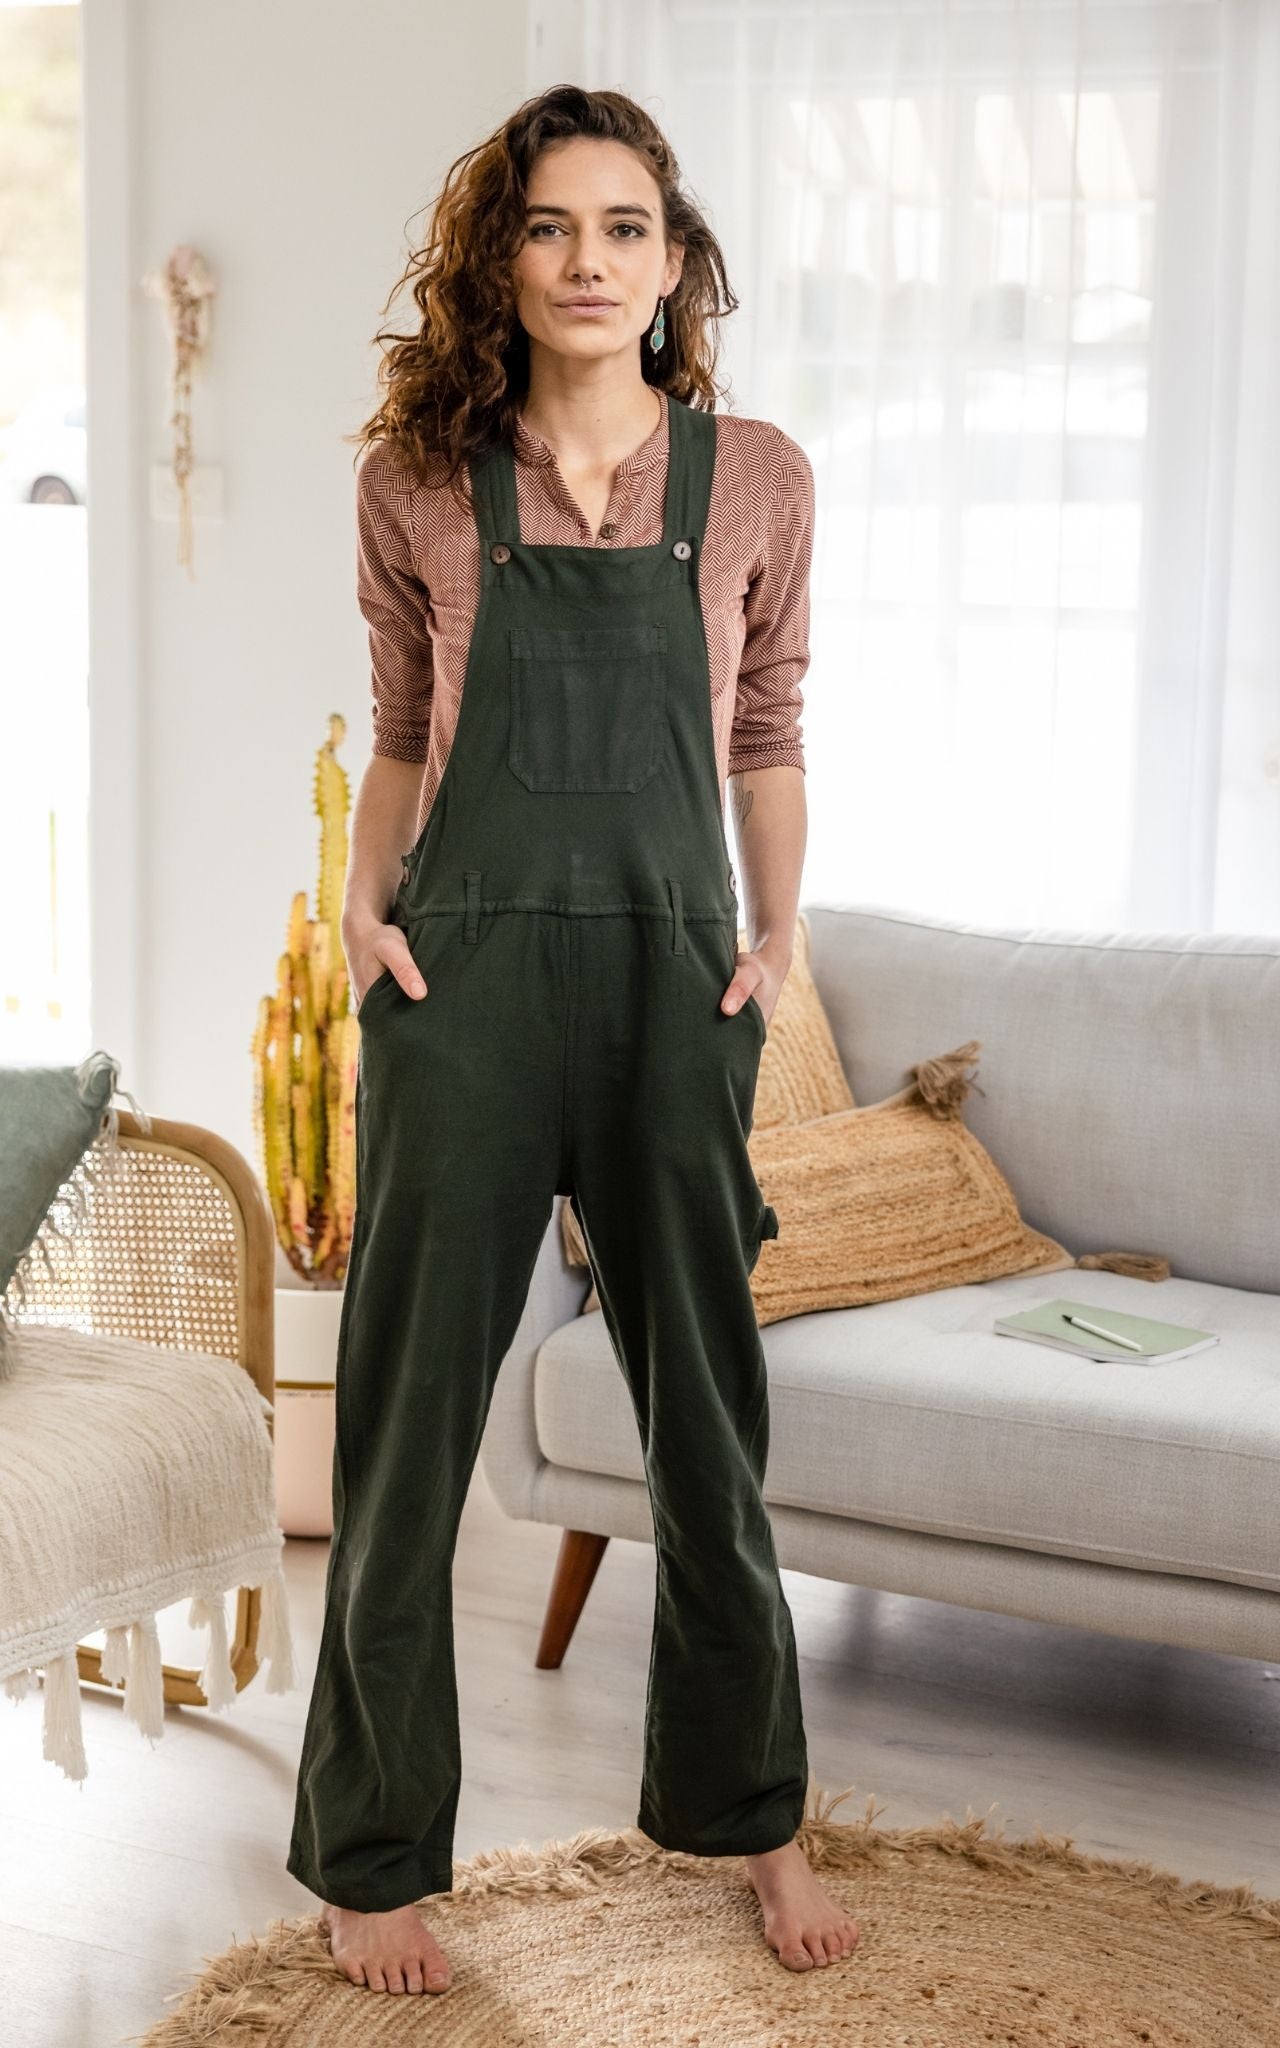 Surya Australia Ethically made cotton Straight Leg Overalls (Dungarees) made in Nepal - Green